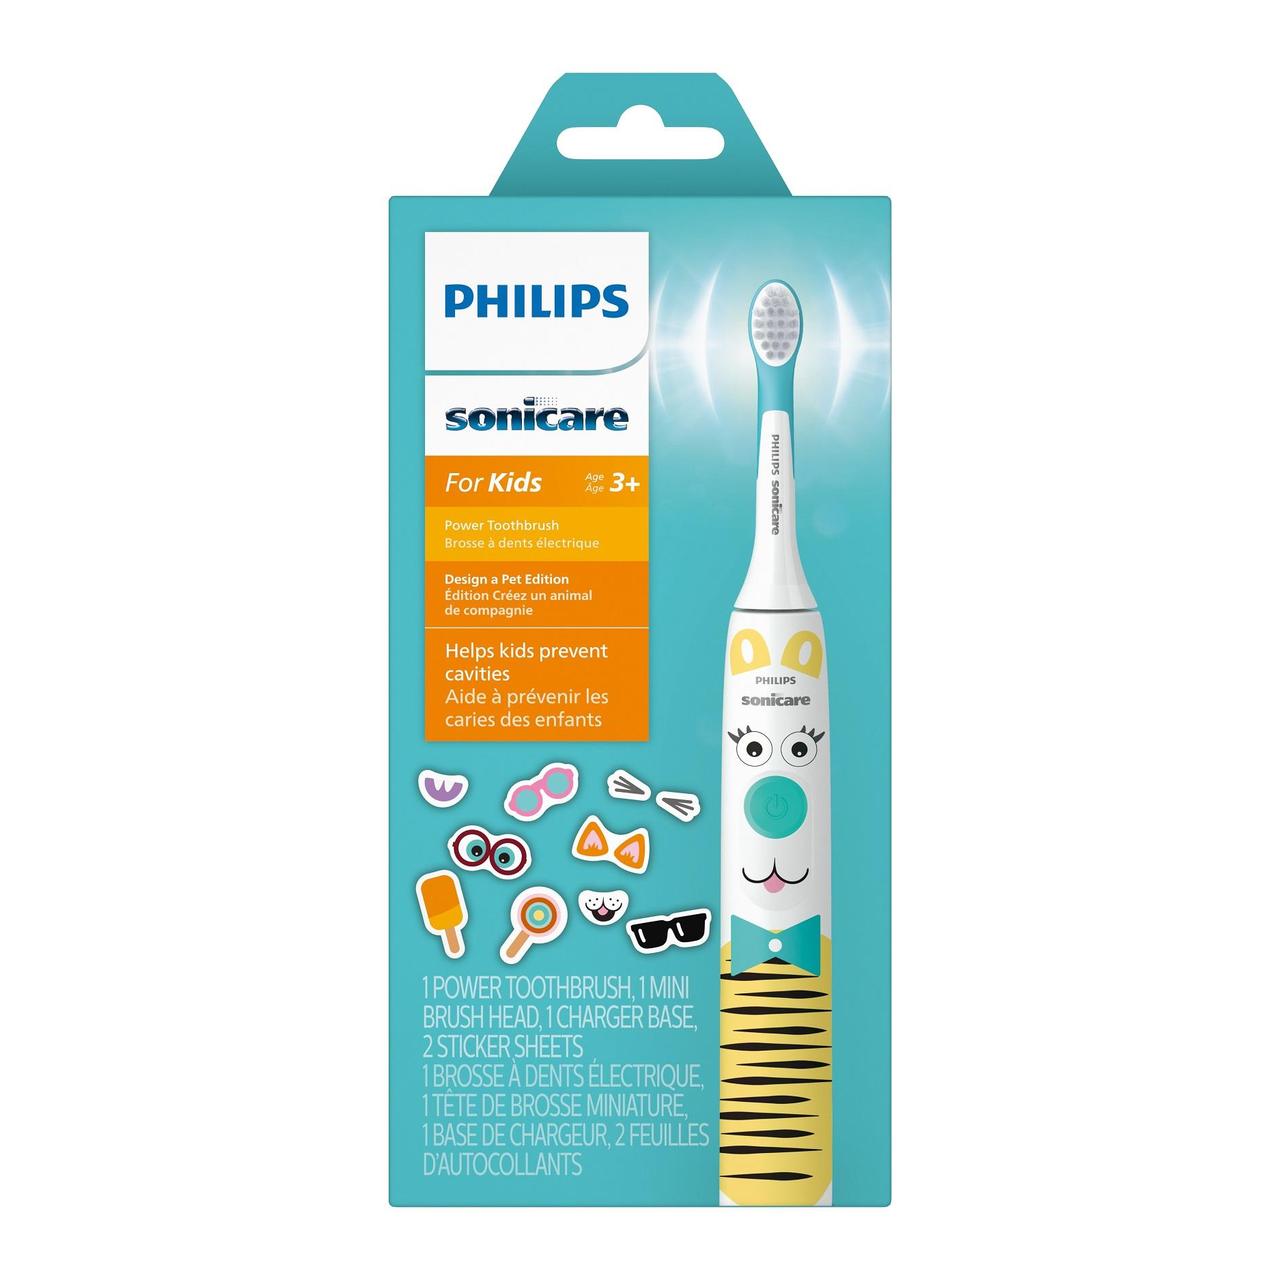 Philips Sonicare for Kids Non-Connected